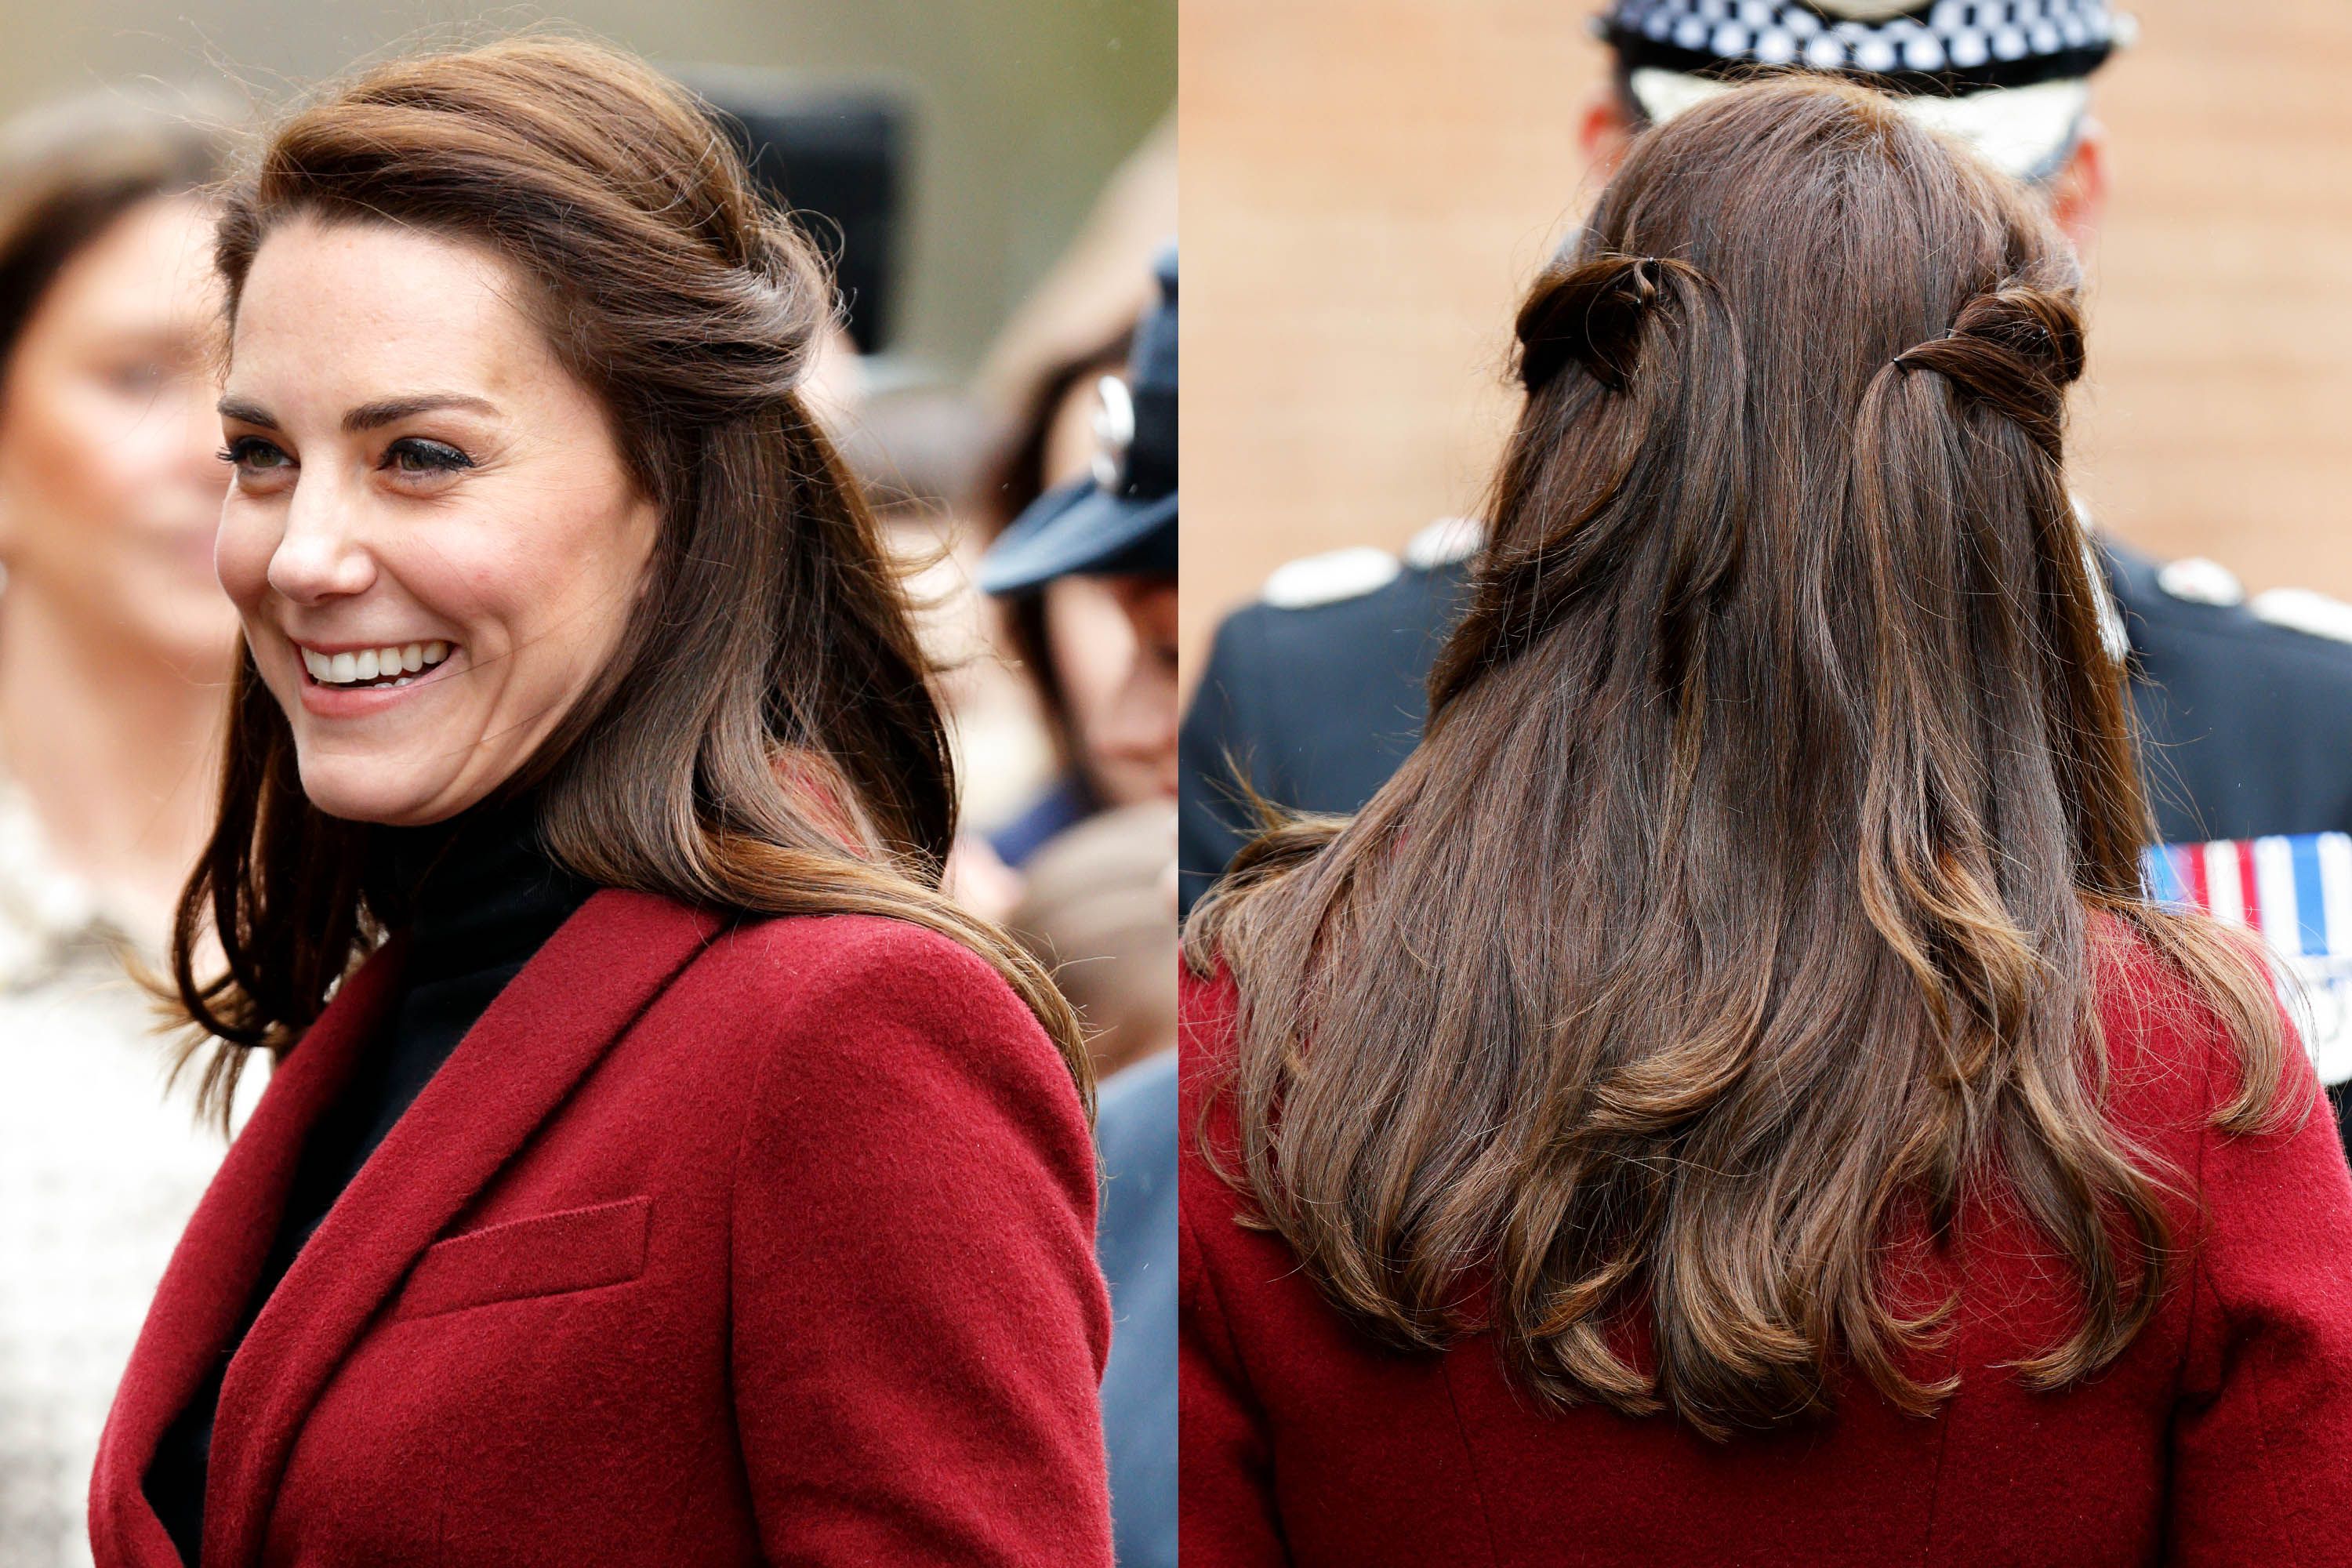 Copy Kate Middleton's Canada royal hairstyles: How to get her chignon and  half-up looks - Mirror Online